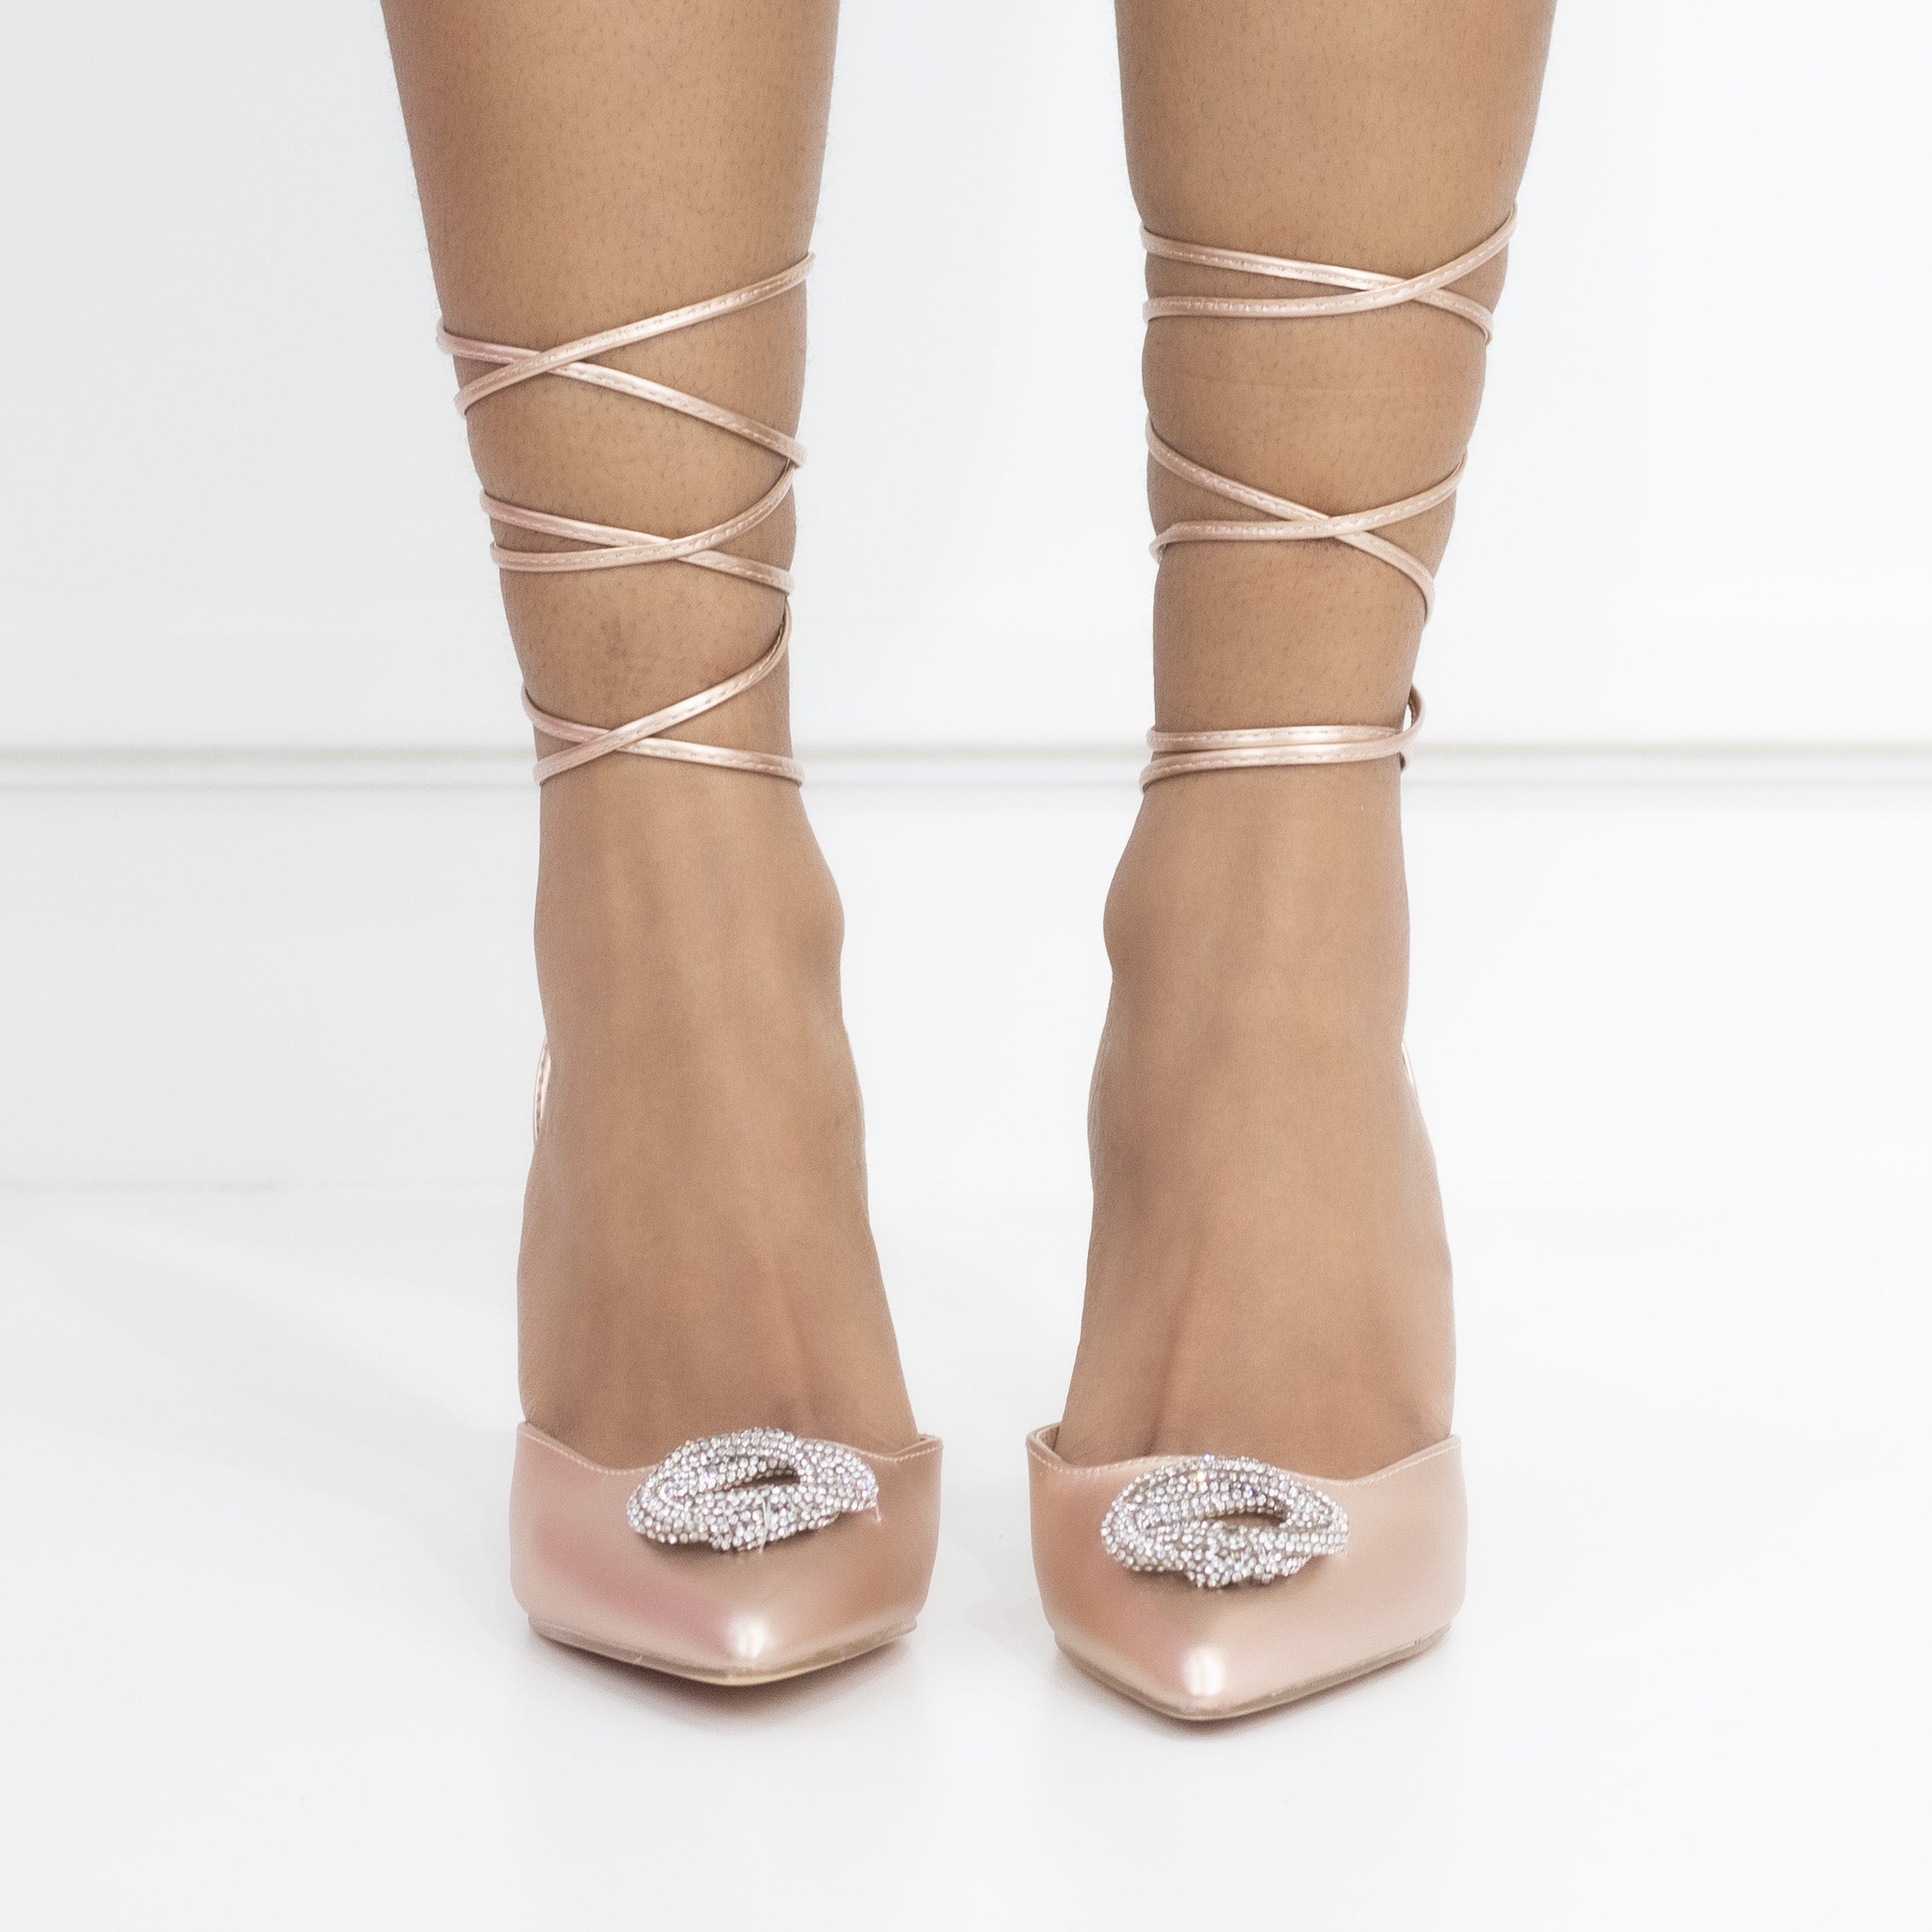 Champagne tie up pointy heel with a round diamond trim cupid